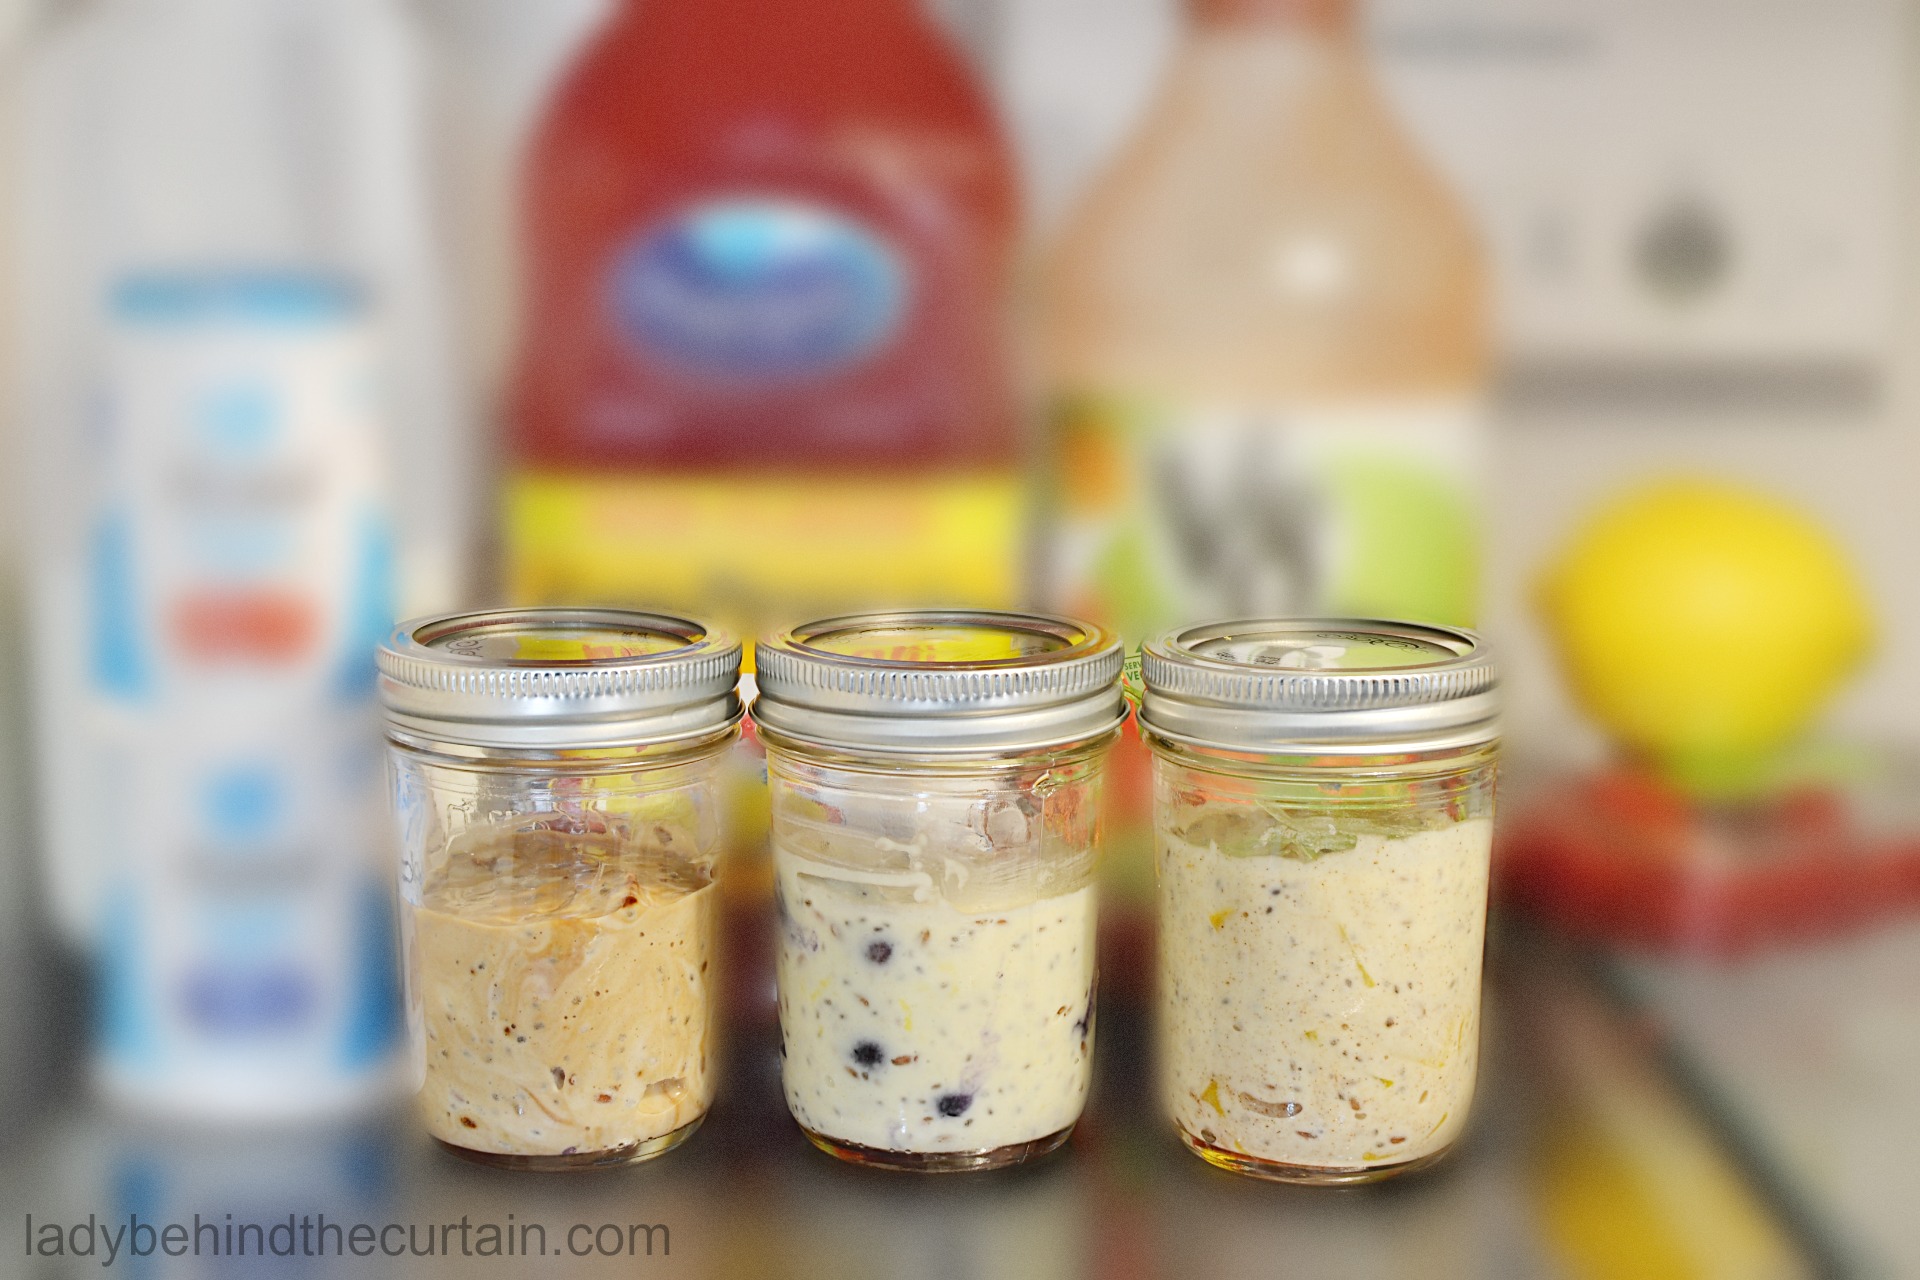 3 Ready To Go Pancake In A Jar Recipes | grab and go breakfast, easy breakfast recipe, easy pancake recipe, breakfast for dinner